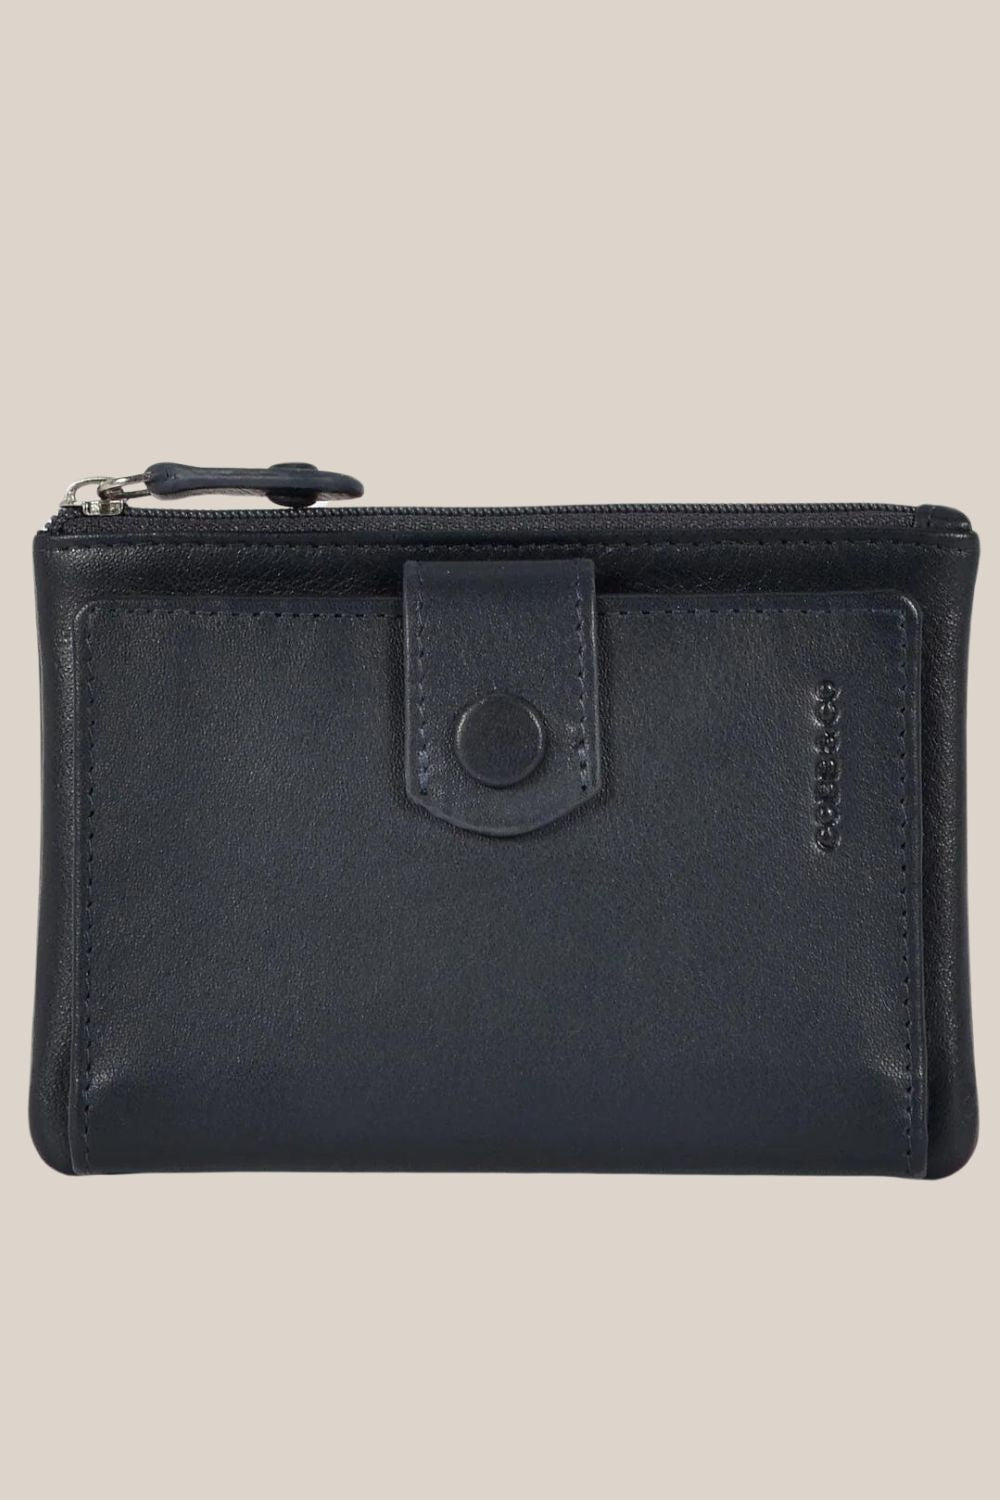 Gabee Collins RFID Compact Leather Wallet